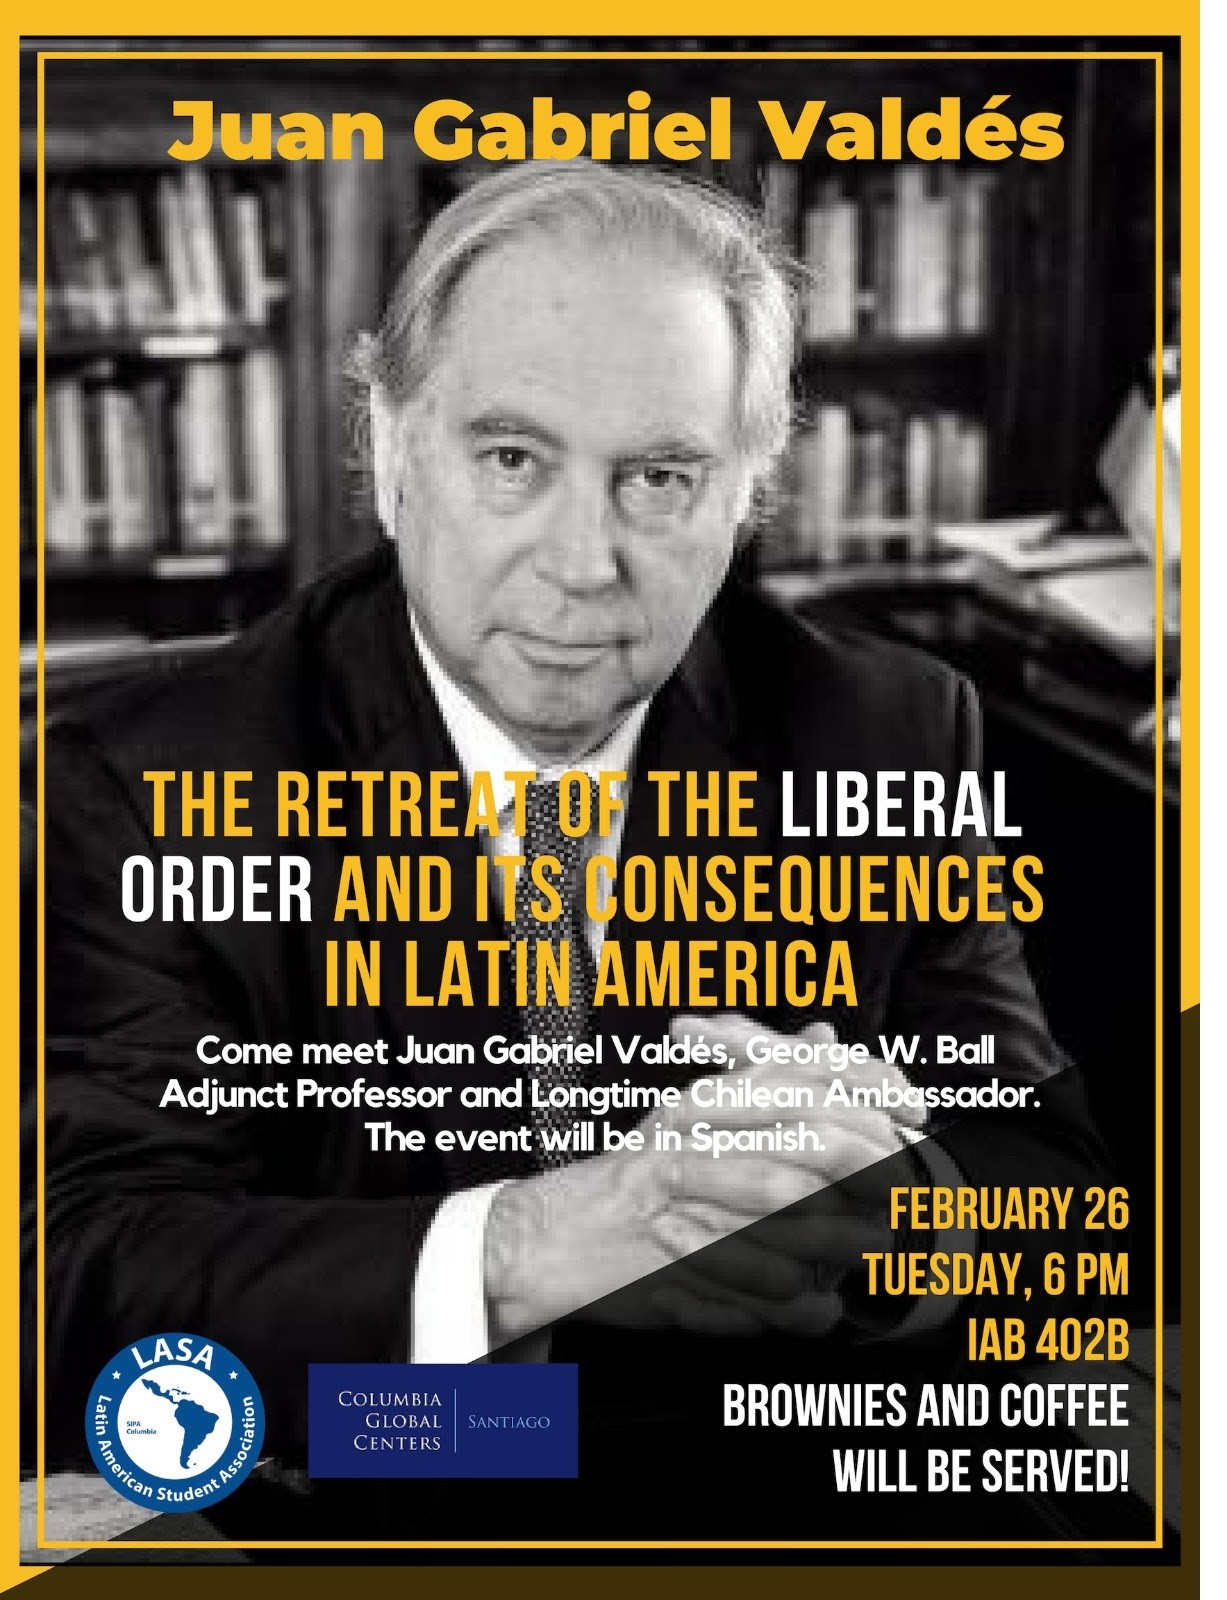 On Campus: Conference on Latin America by SIPA Professor Juan Gabriel Valdés